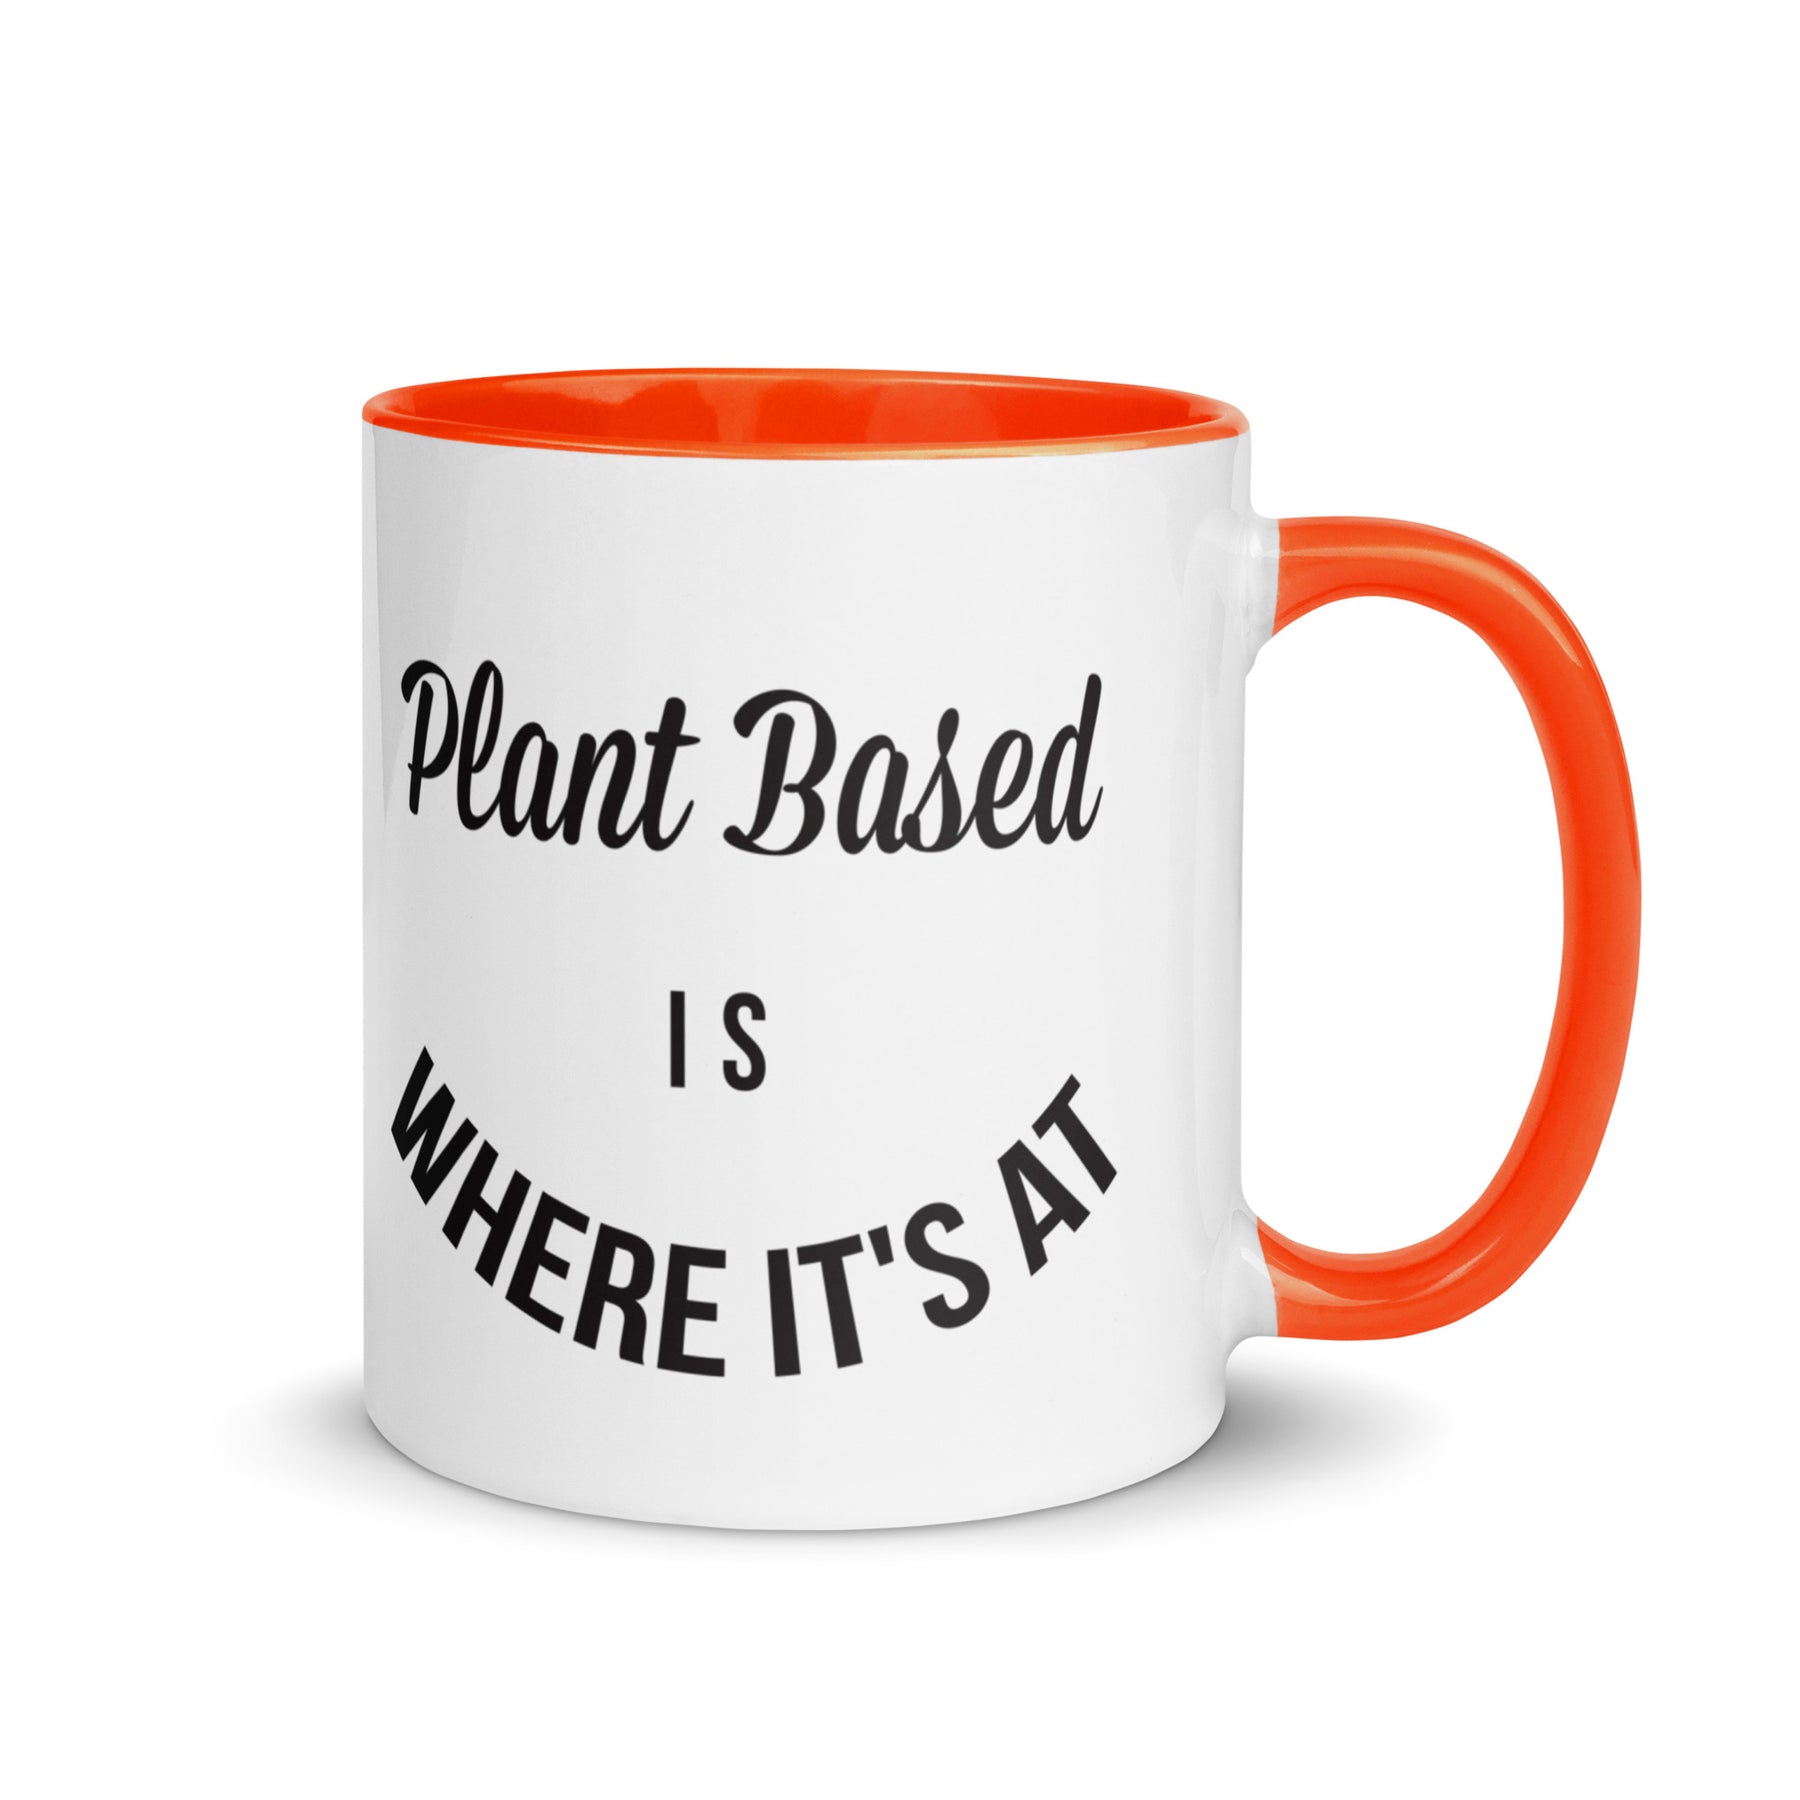 PLANT BASED IS WHERE IT'S AT Mug with Color Inside